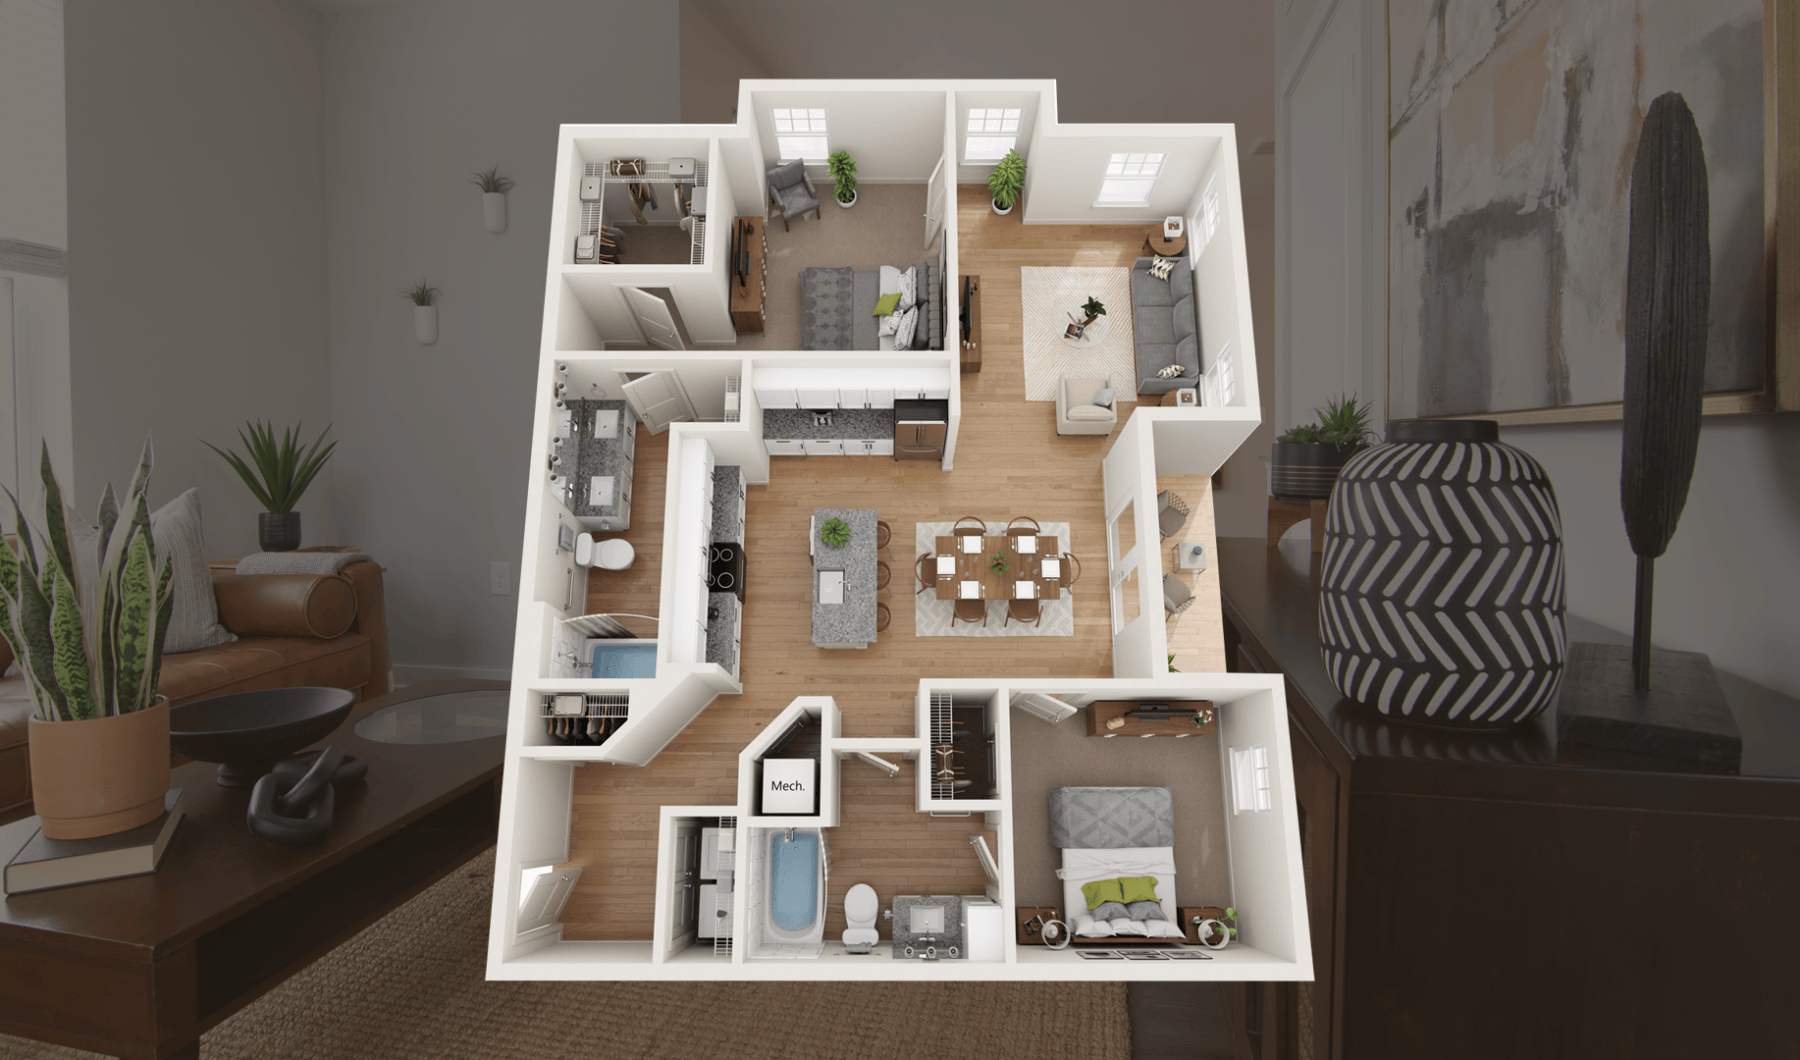 A floor-plan of a 2-bed, 2-bath apartment home overlaid on an image of a living area in an apartment home